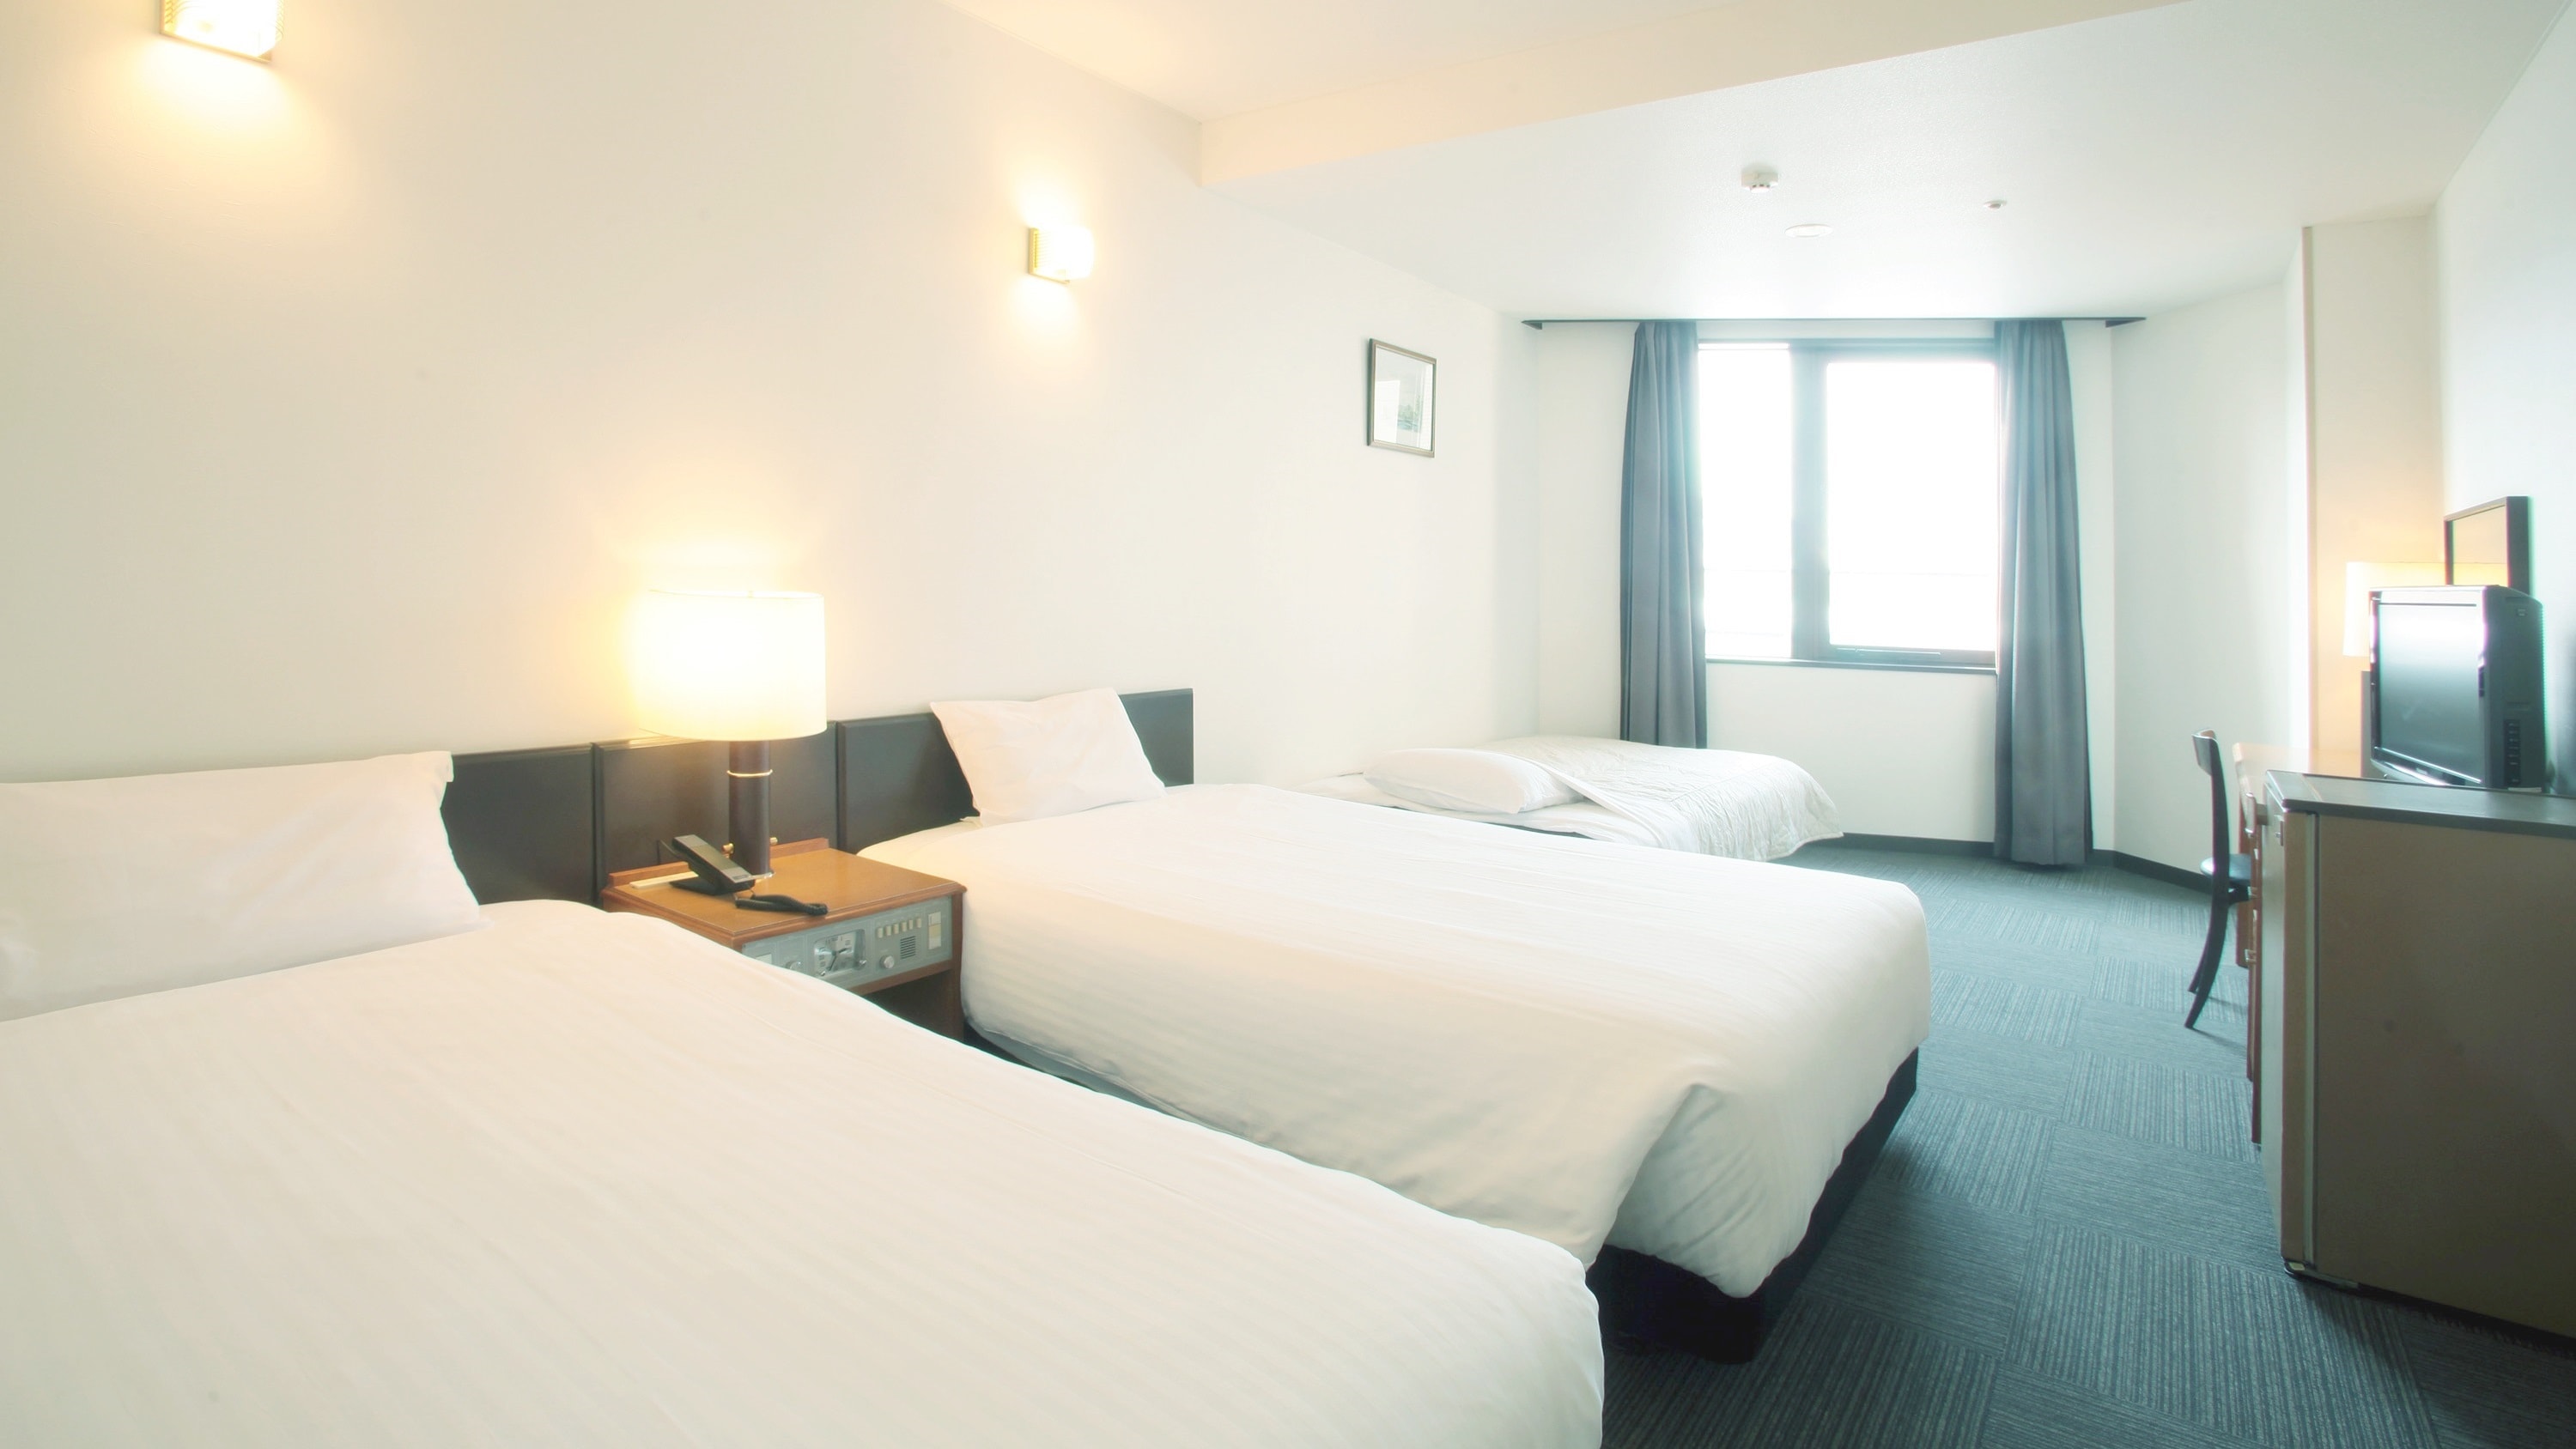 ■ Triple room ■ Spacious 23.4㎡ ～ / 3 people available!